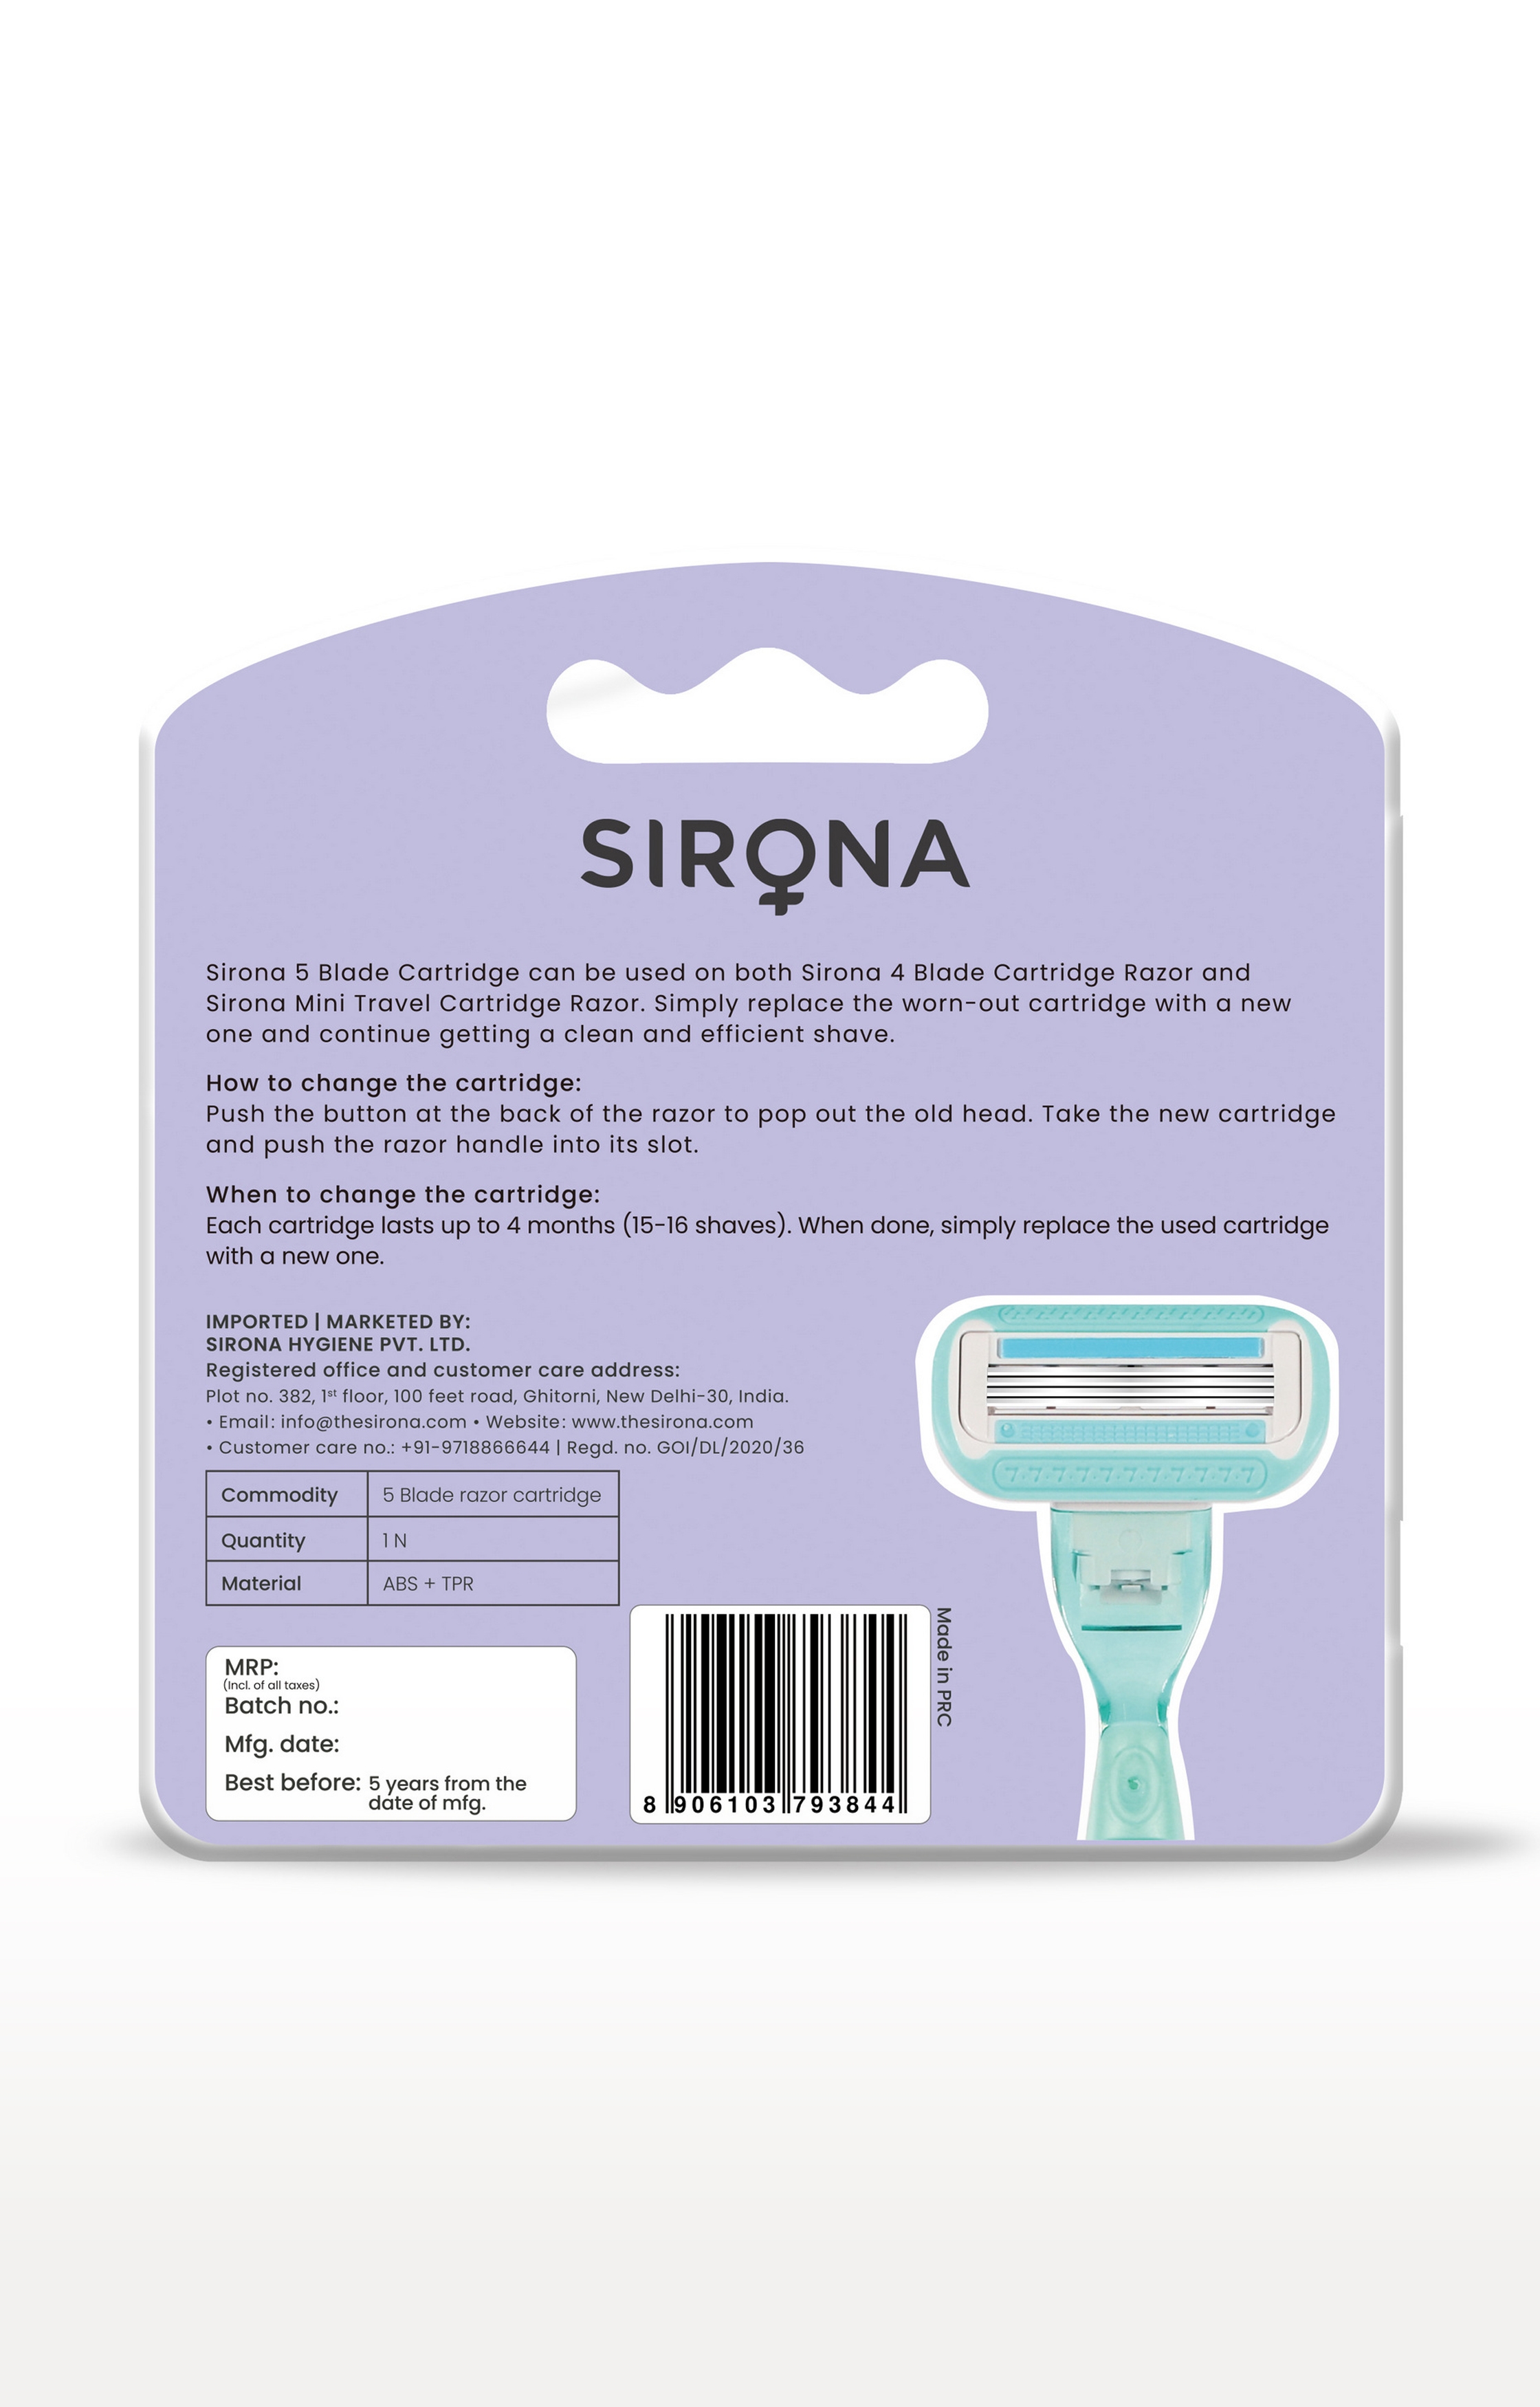 Sirona | Sirona Hair Removal Razor Blades/Refills/Cartridges For Women – Pack Of 2 With 5 Swedish Stainless Steel Blade, Aloe Vera & Vitamin E Lubrication Strip 1